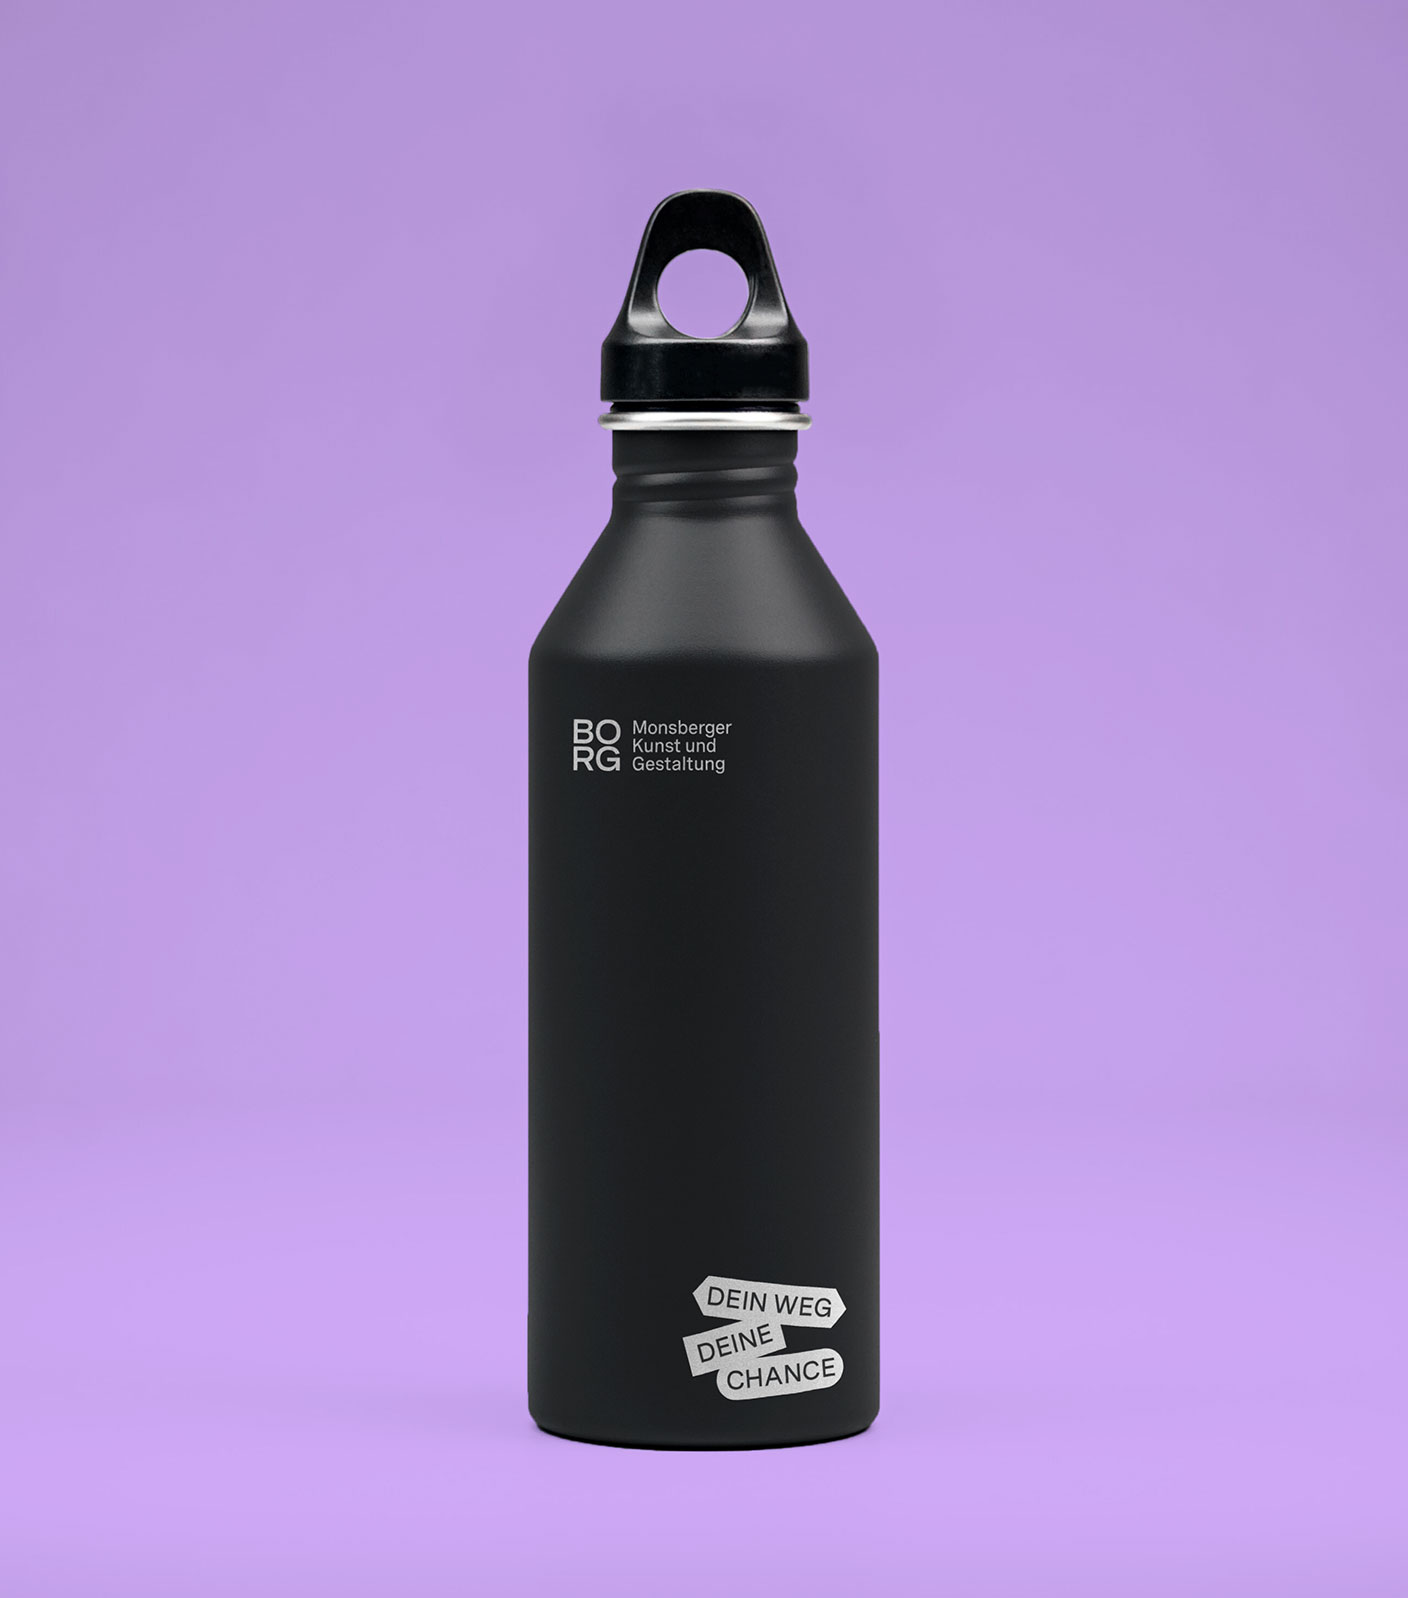 A black drinking bottle with the BORG Monsberger logo and the claim 